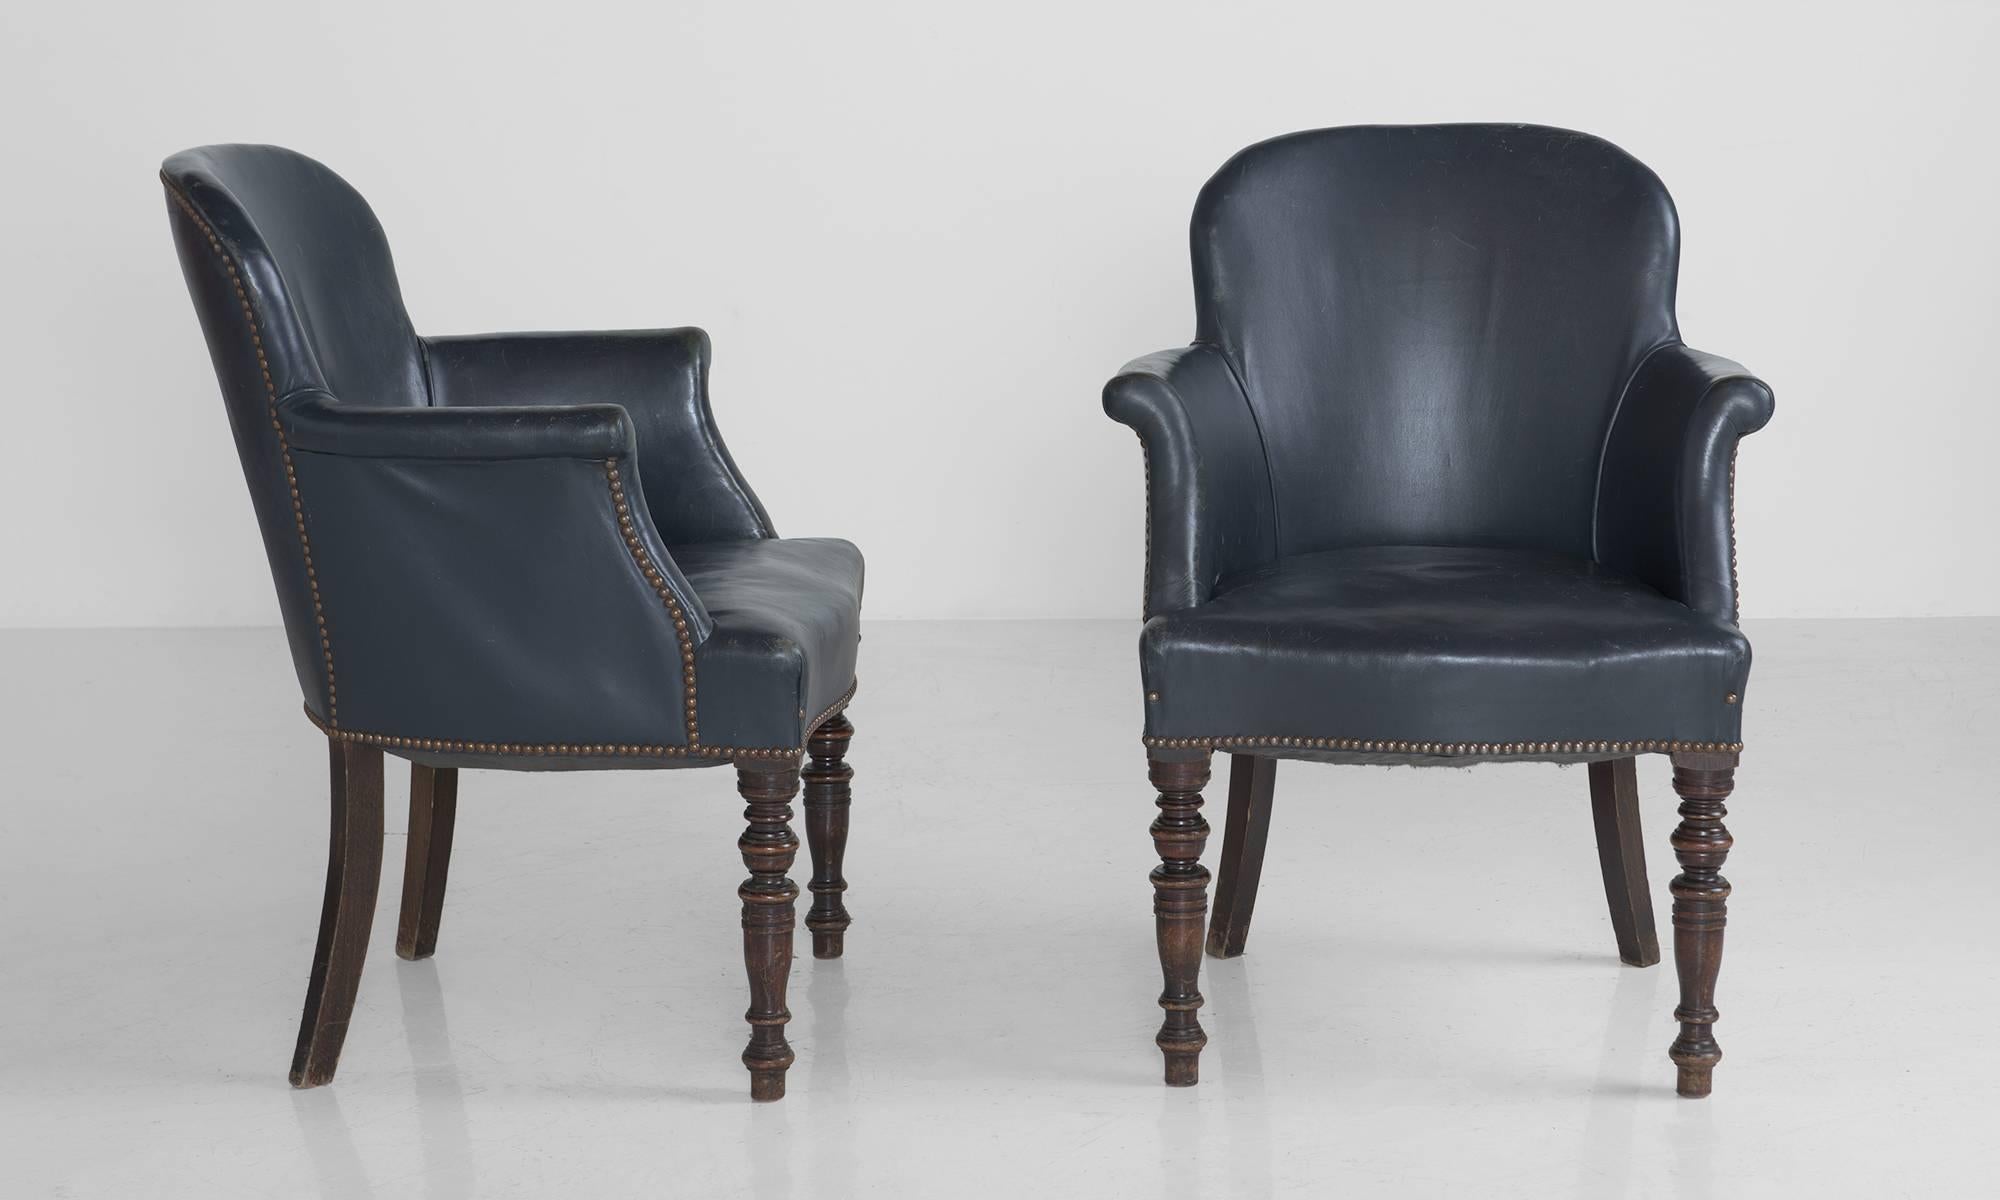 French Pair of Leather Bridge Chairs, circa 1920